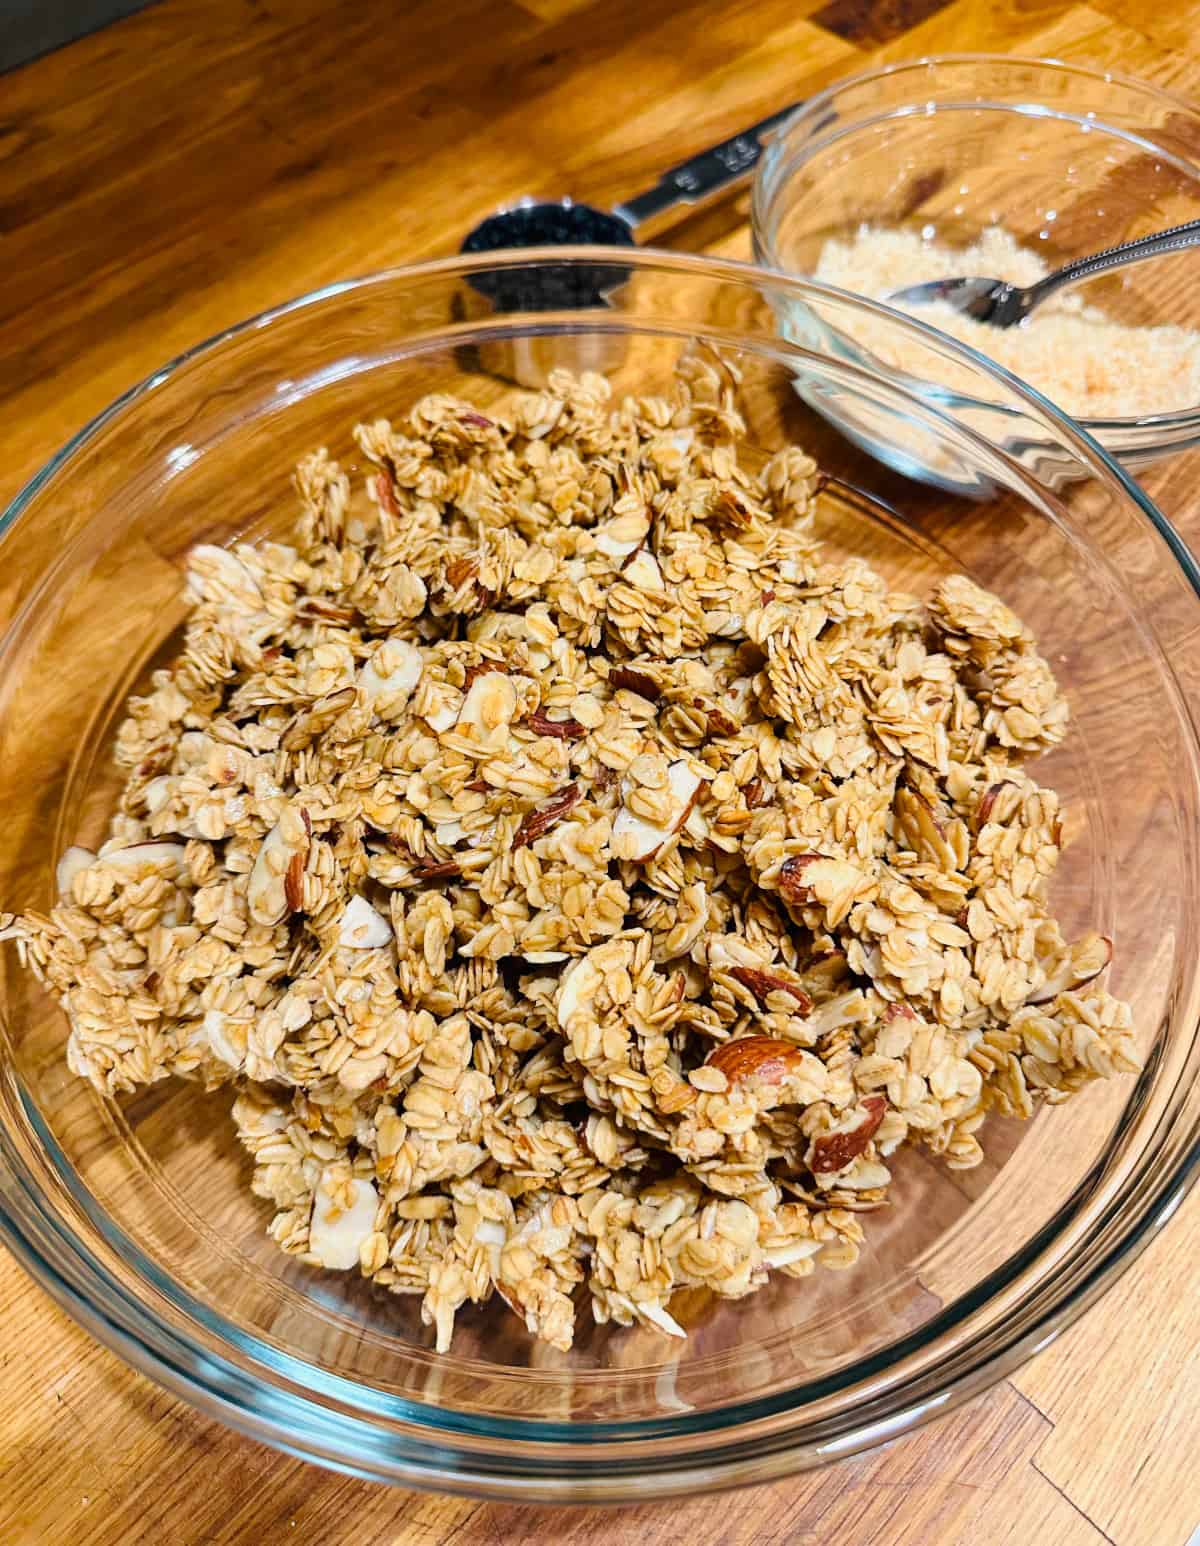 Chunks of granola in a glass bowl.